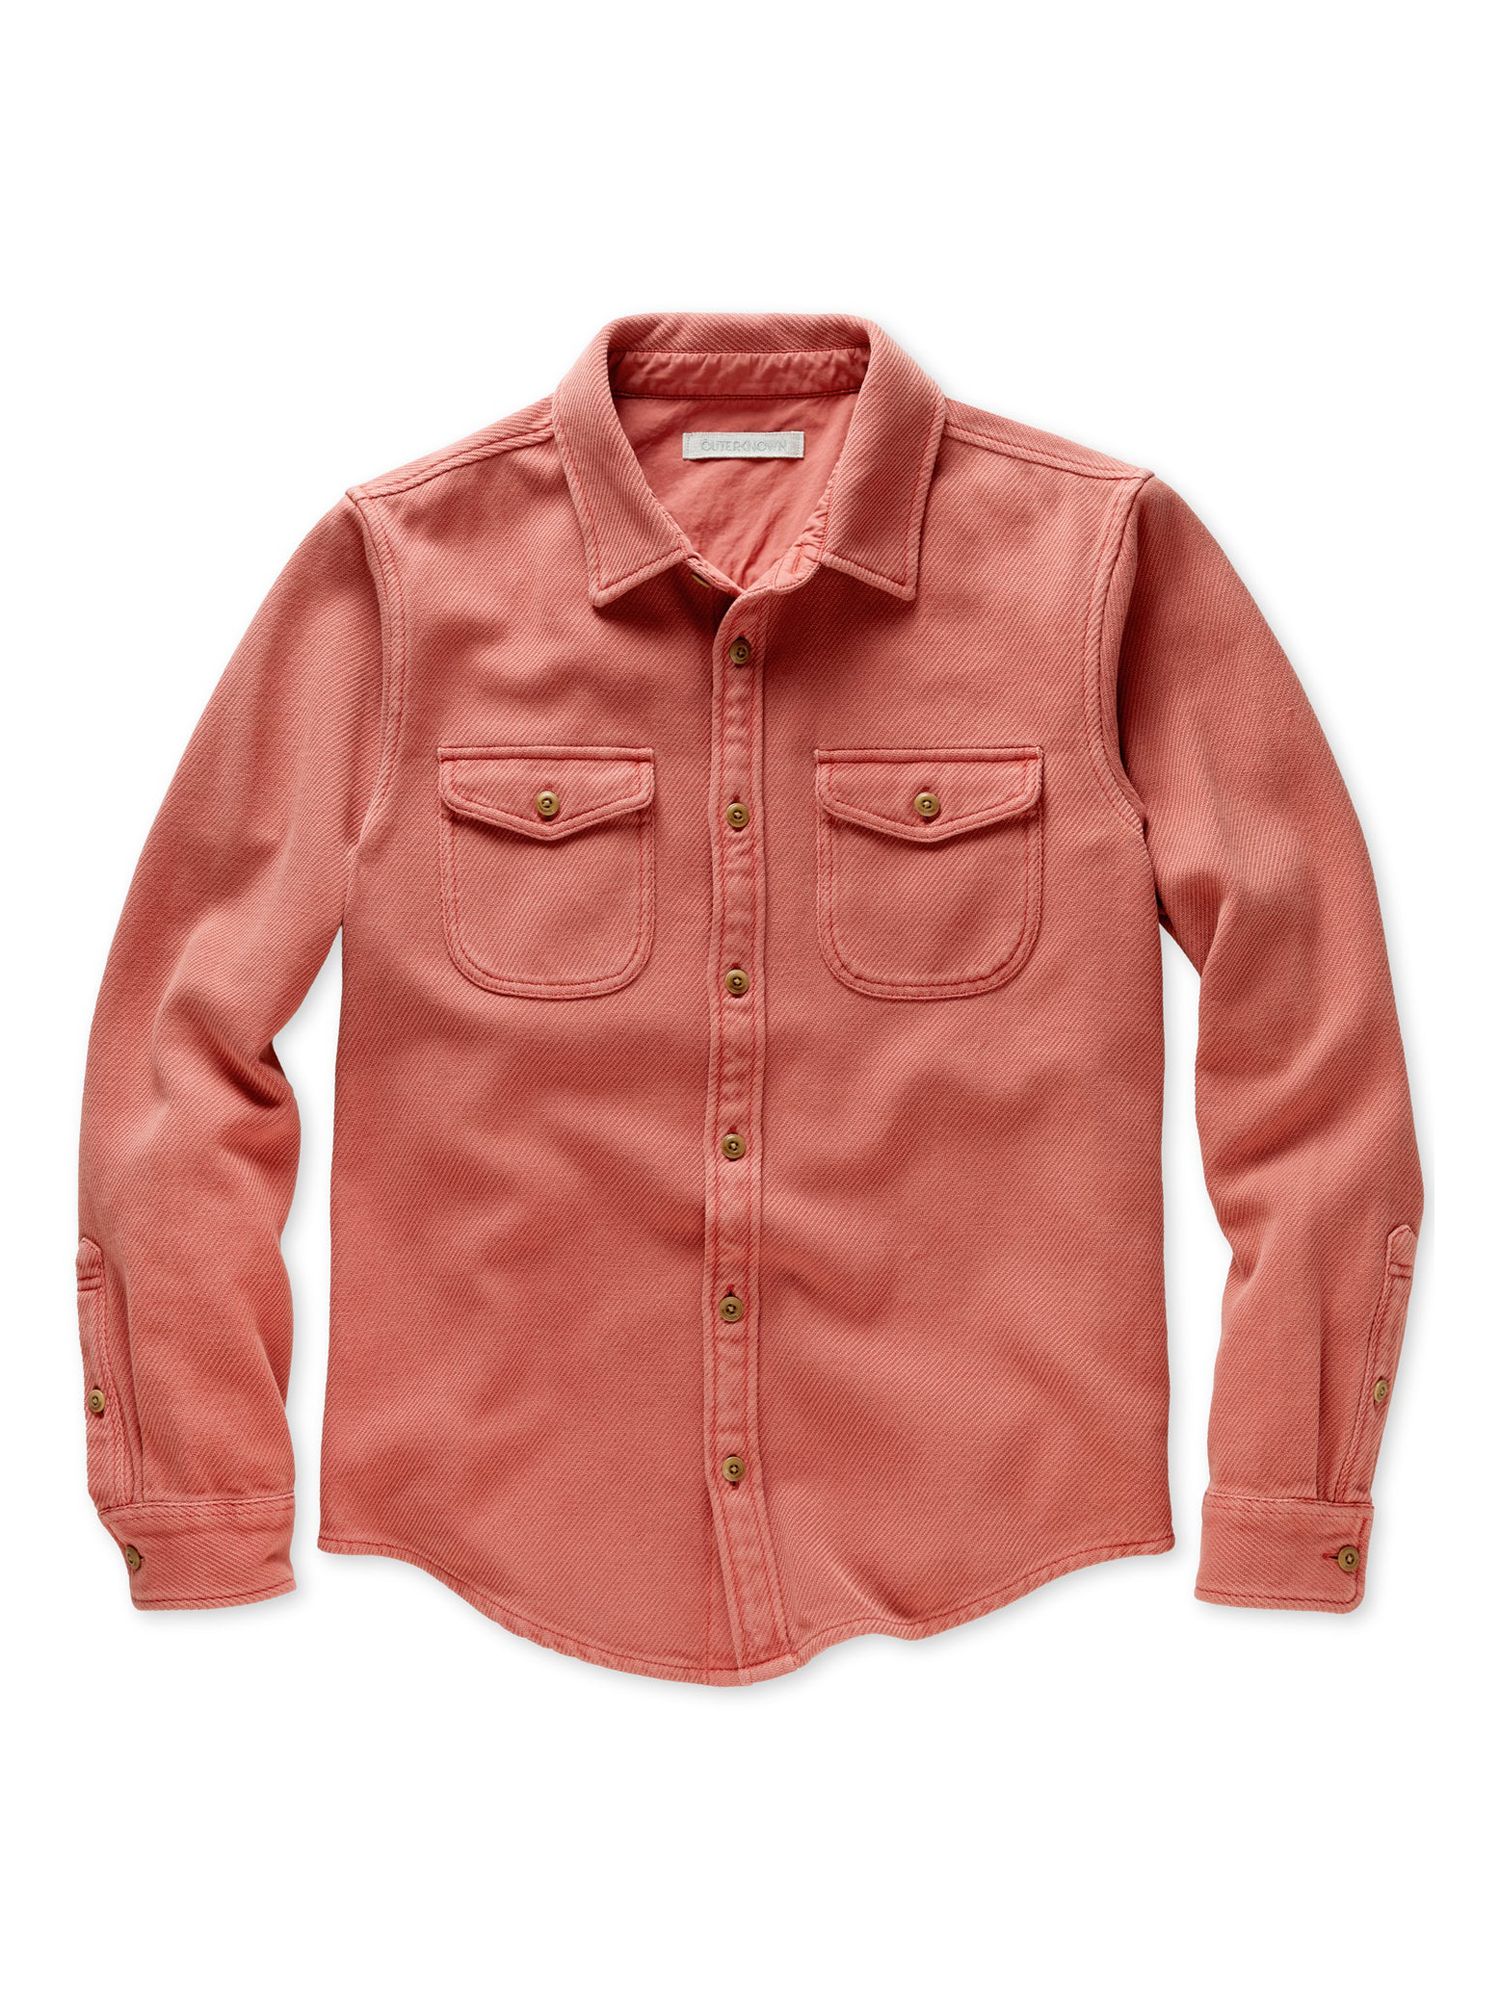 Outerknown Chroma Blanket Shirt, Mineral Red, L